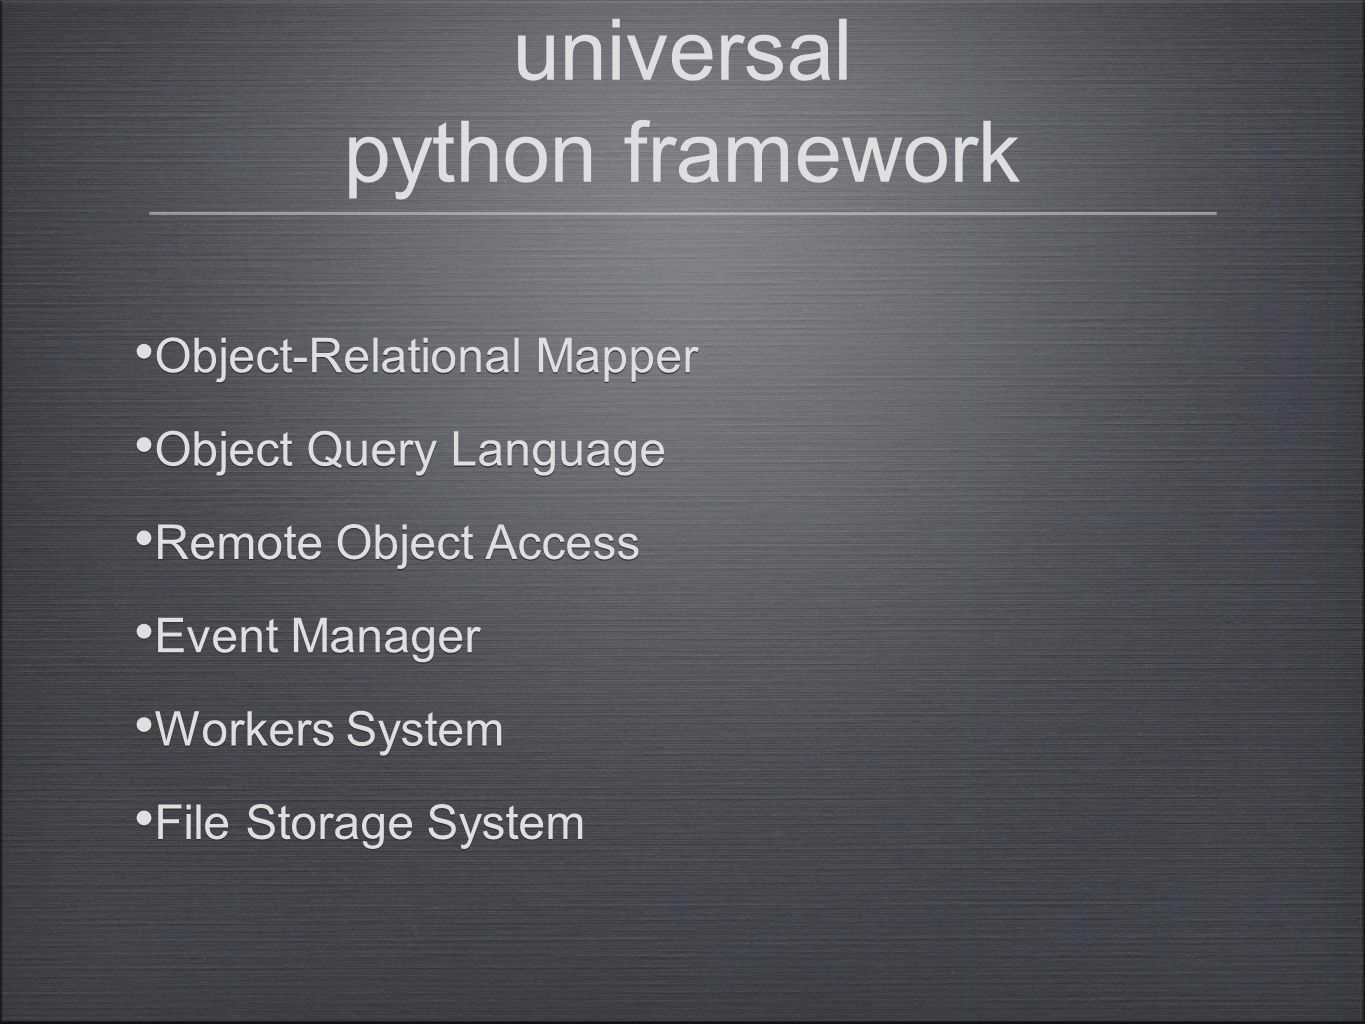 universal python framework Remote Object Access Object Query Language Object-Relational Mapper Event Manager Workers System File Storage System